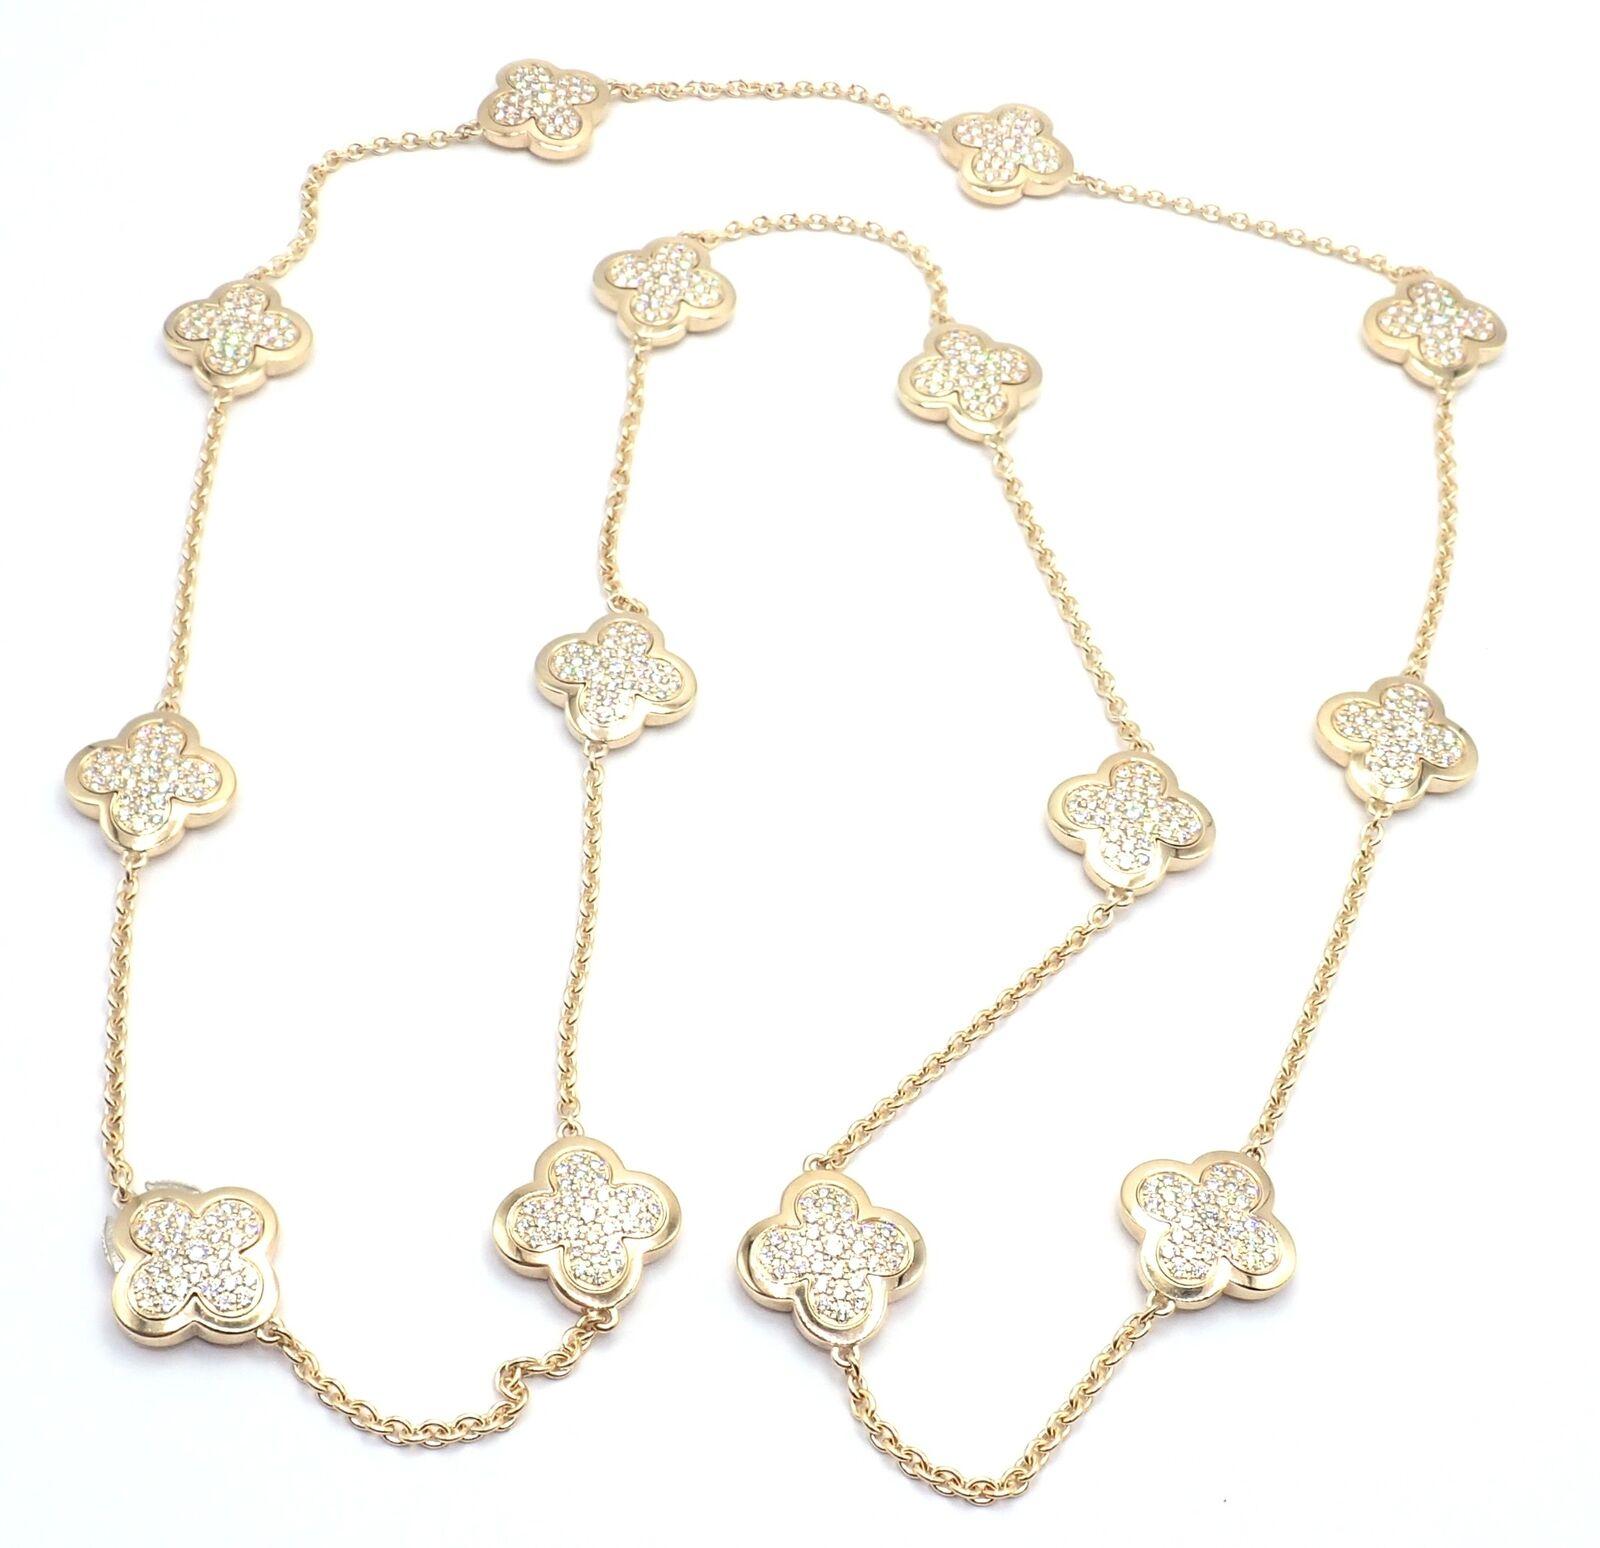 18k Yellow Gold Pure Alhambra 14 Motifs Diamond Necklace by Van Cleef & Arpels.
With 14 diamond pave Alhambra motifs 16mm each VVS1 clarity, E color total weight approximately 5.45ct
This necklace comes with a VCA box and an original receipt from a